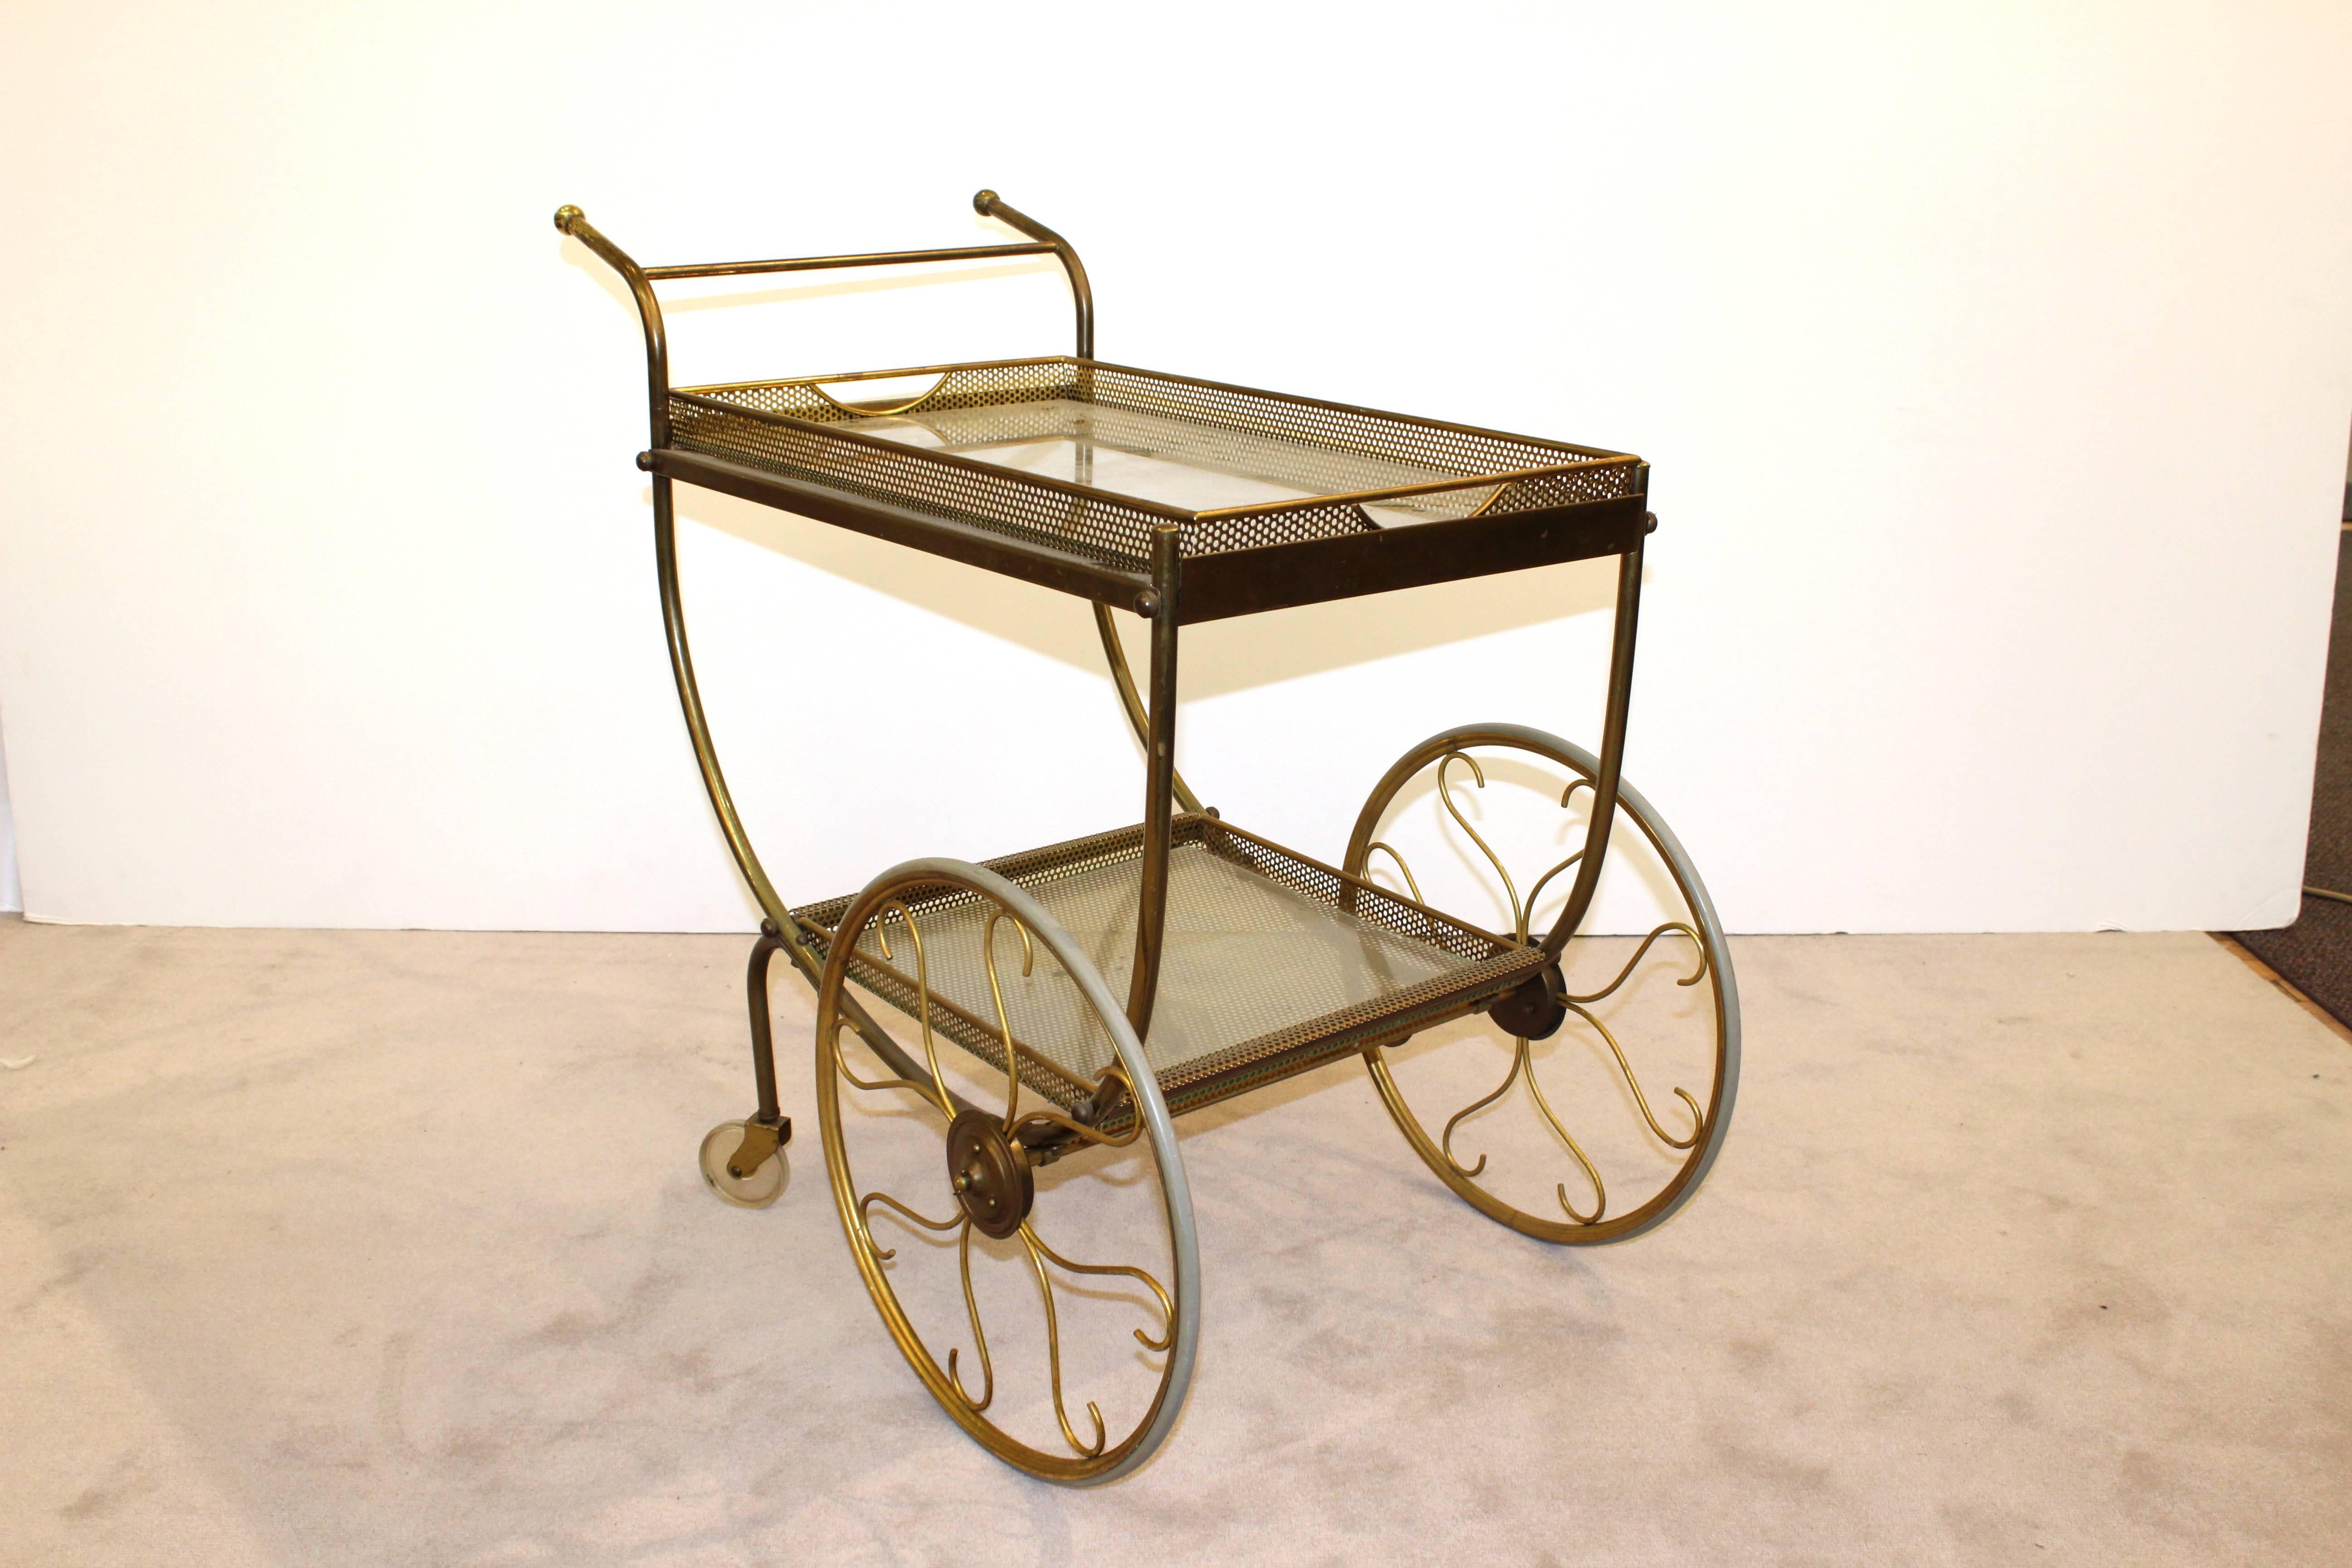 This bar cart, dating from the mid-20th century features two perforated metal tiers, each lined in glass and four wheels. The spokes on the set of the two larger wheels are curved. The top tier of the bar cart features a removable tray with two